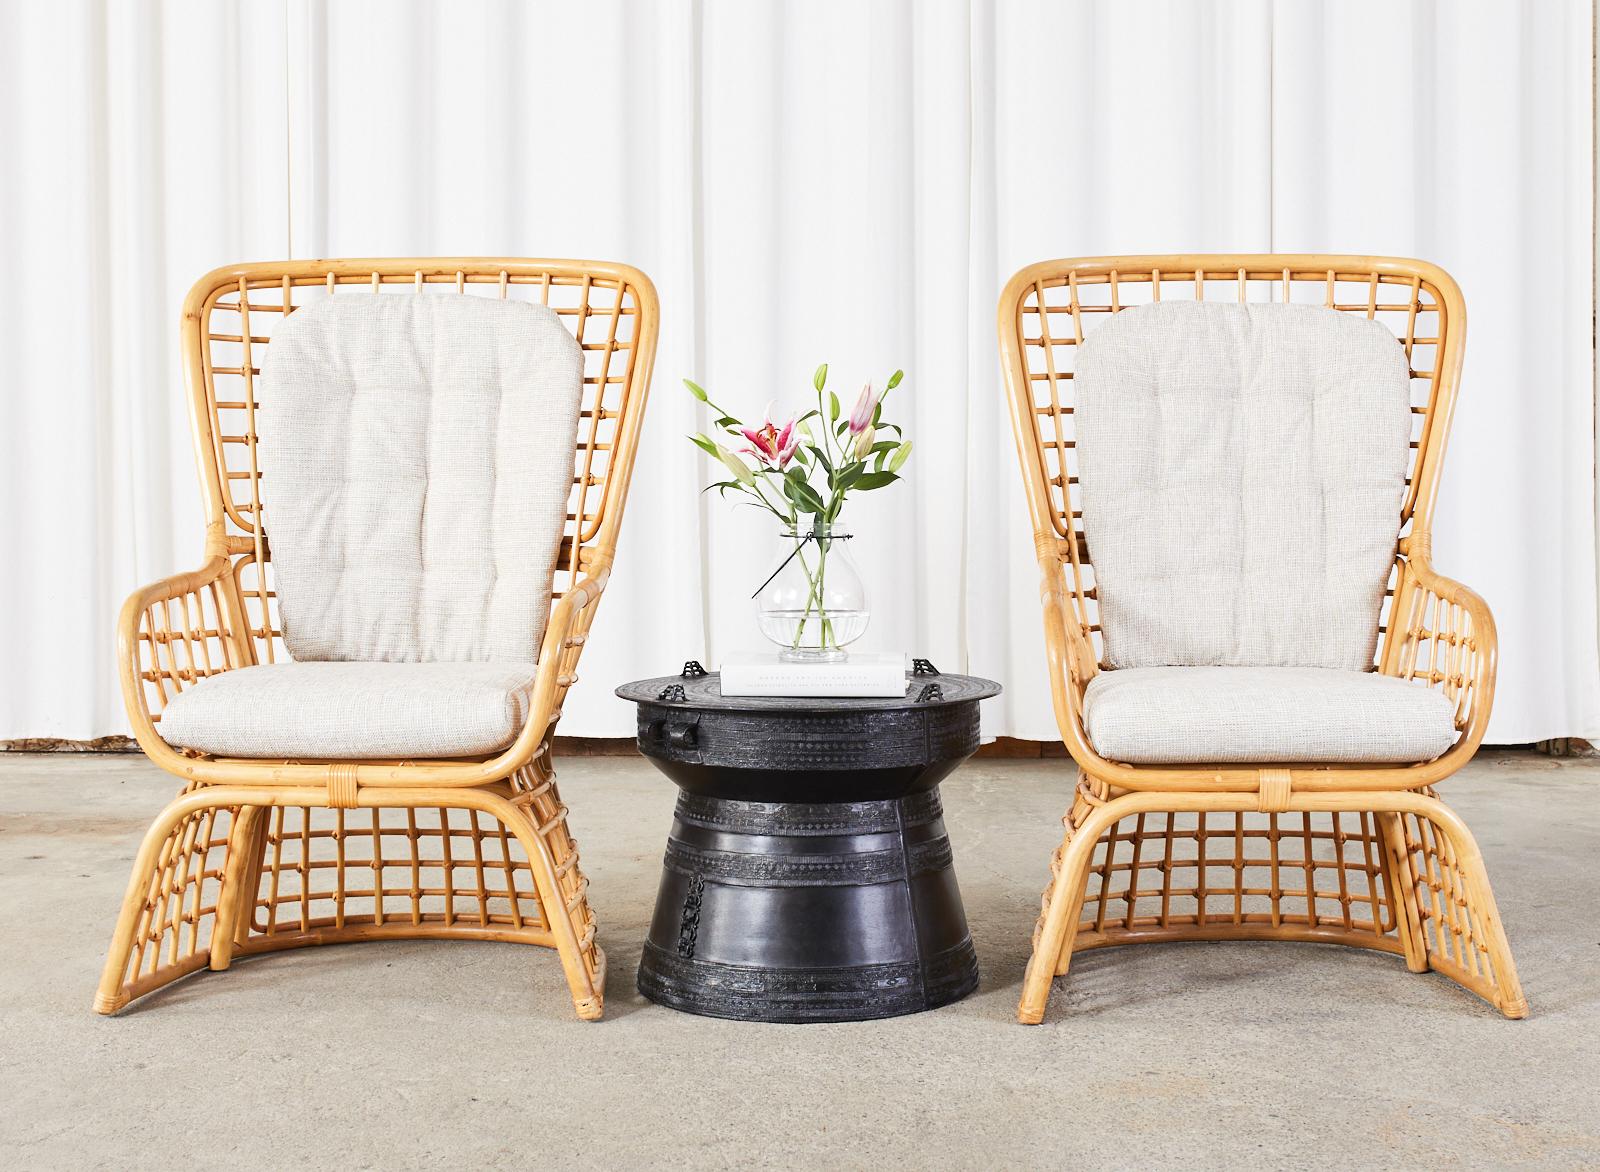 Mid-Century Modern pair of high back wing chairs constructed from rattan and wicker. Made in the organic modern style featuring a large bent rattan frame with open fretwork geometric grid design. The chairs have a waisted or hourglass form with a